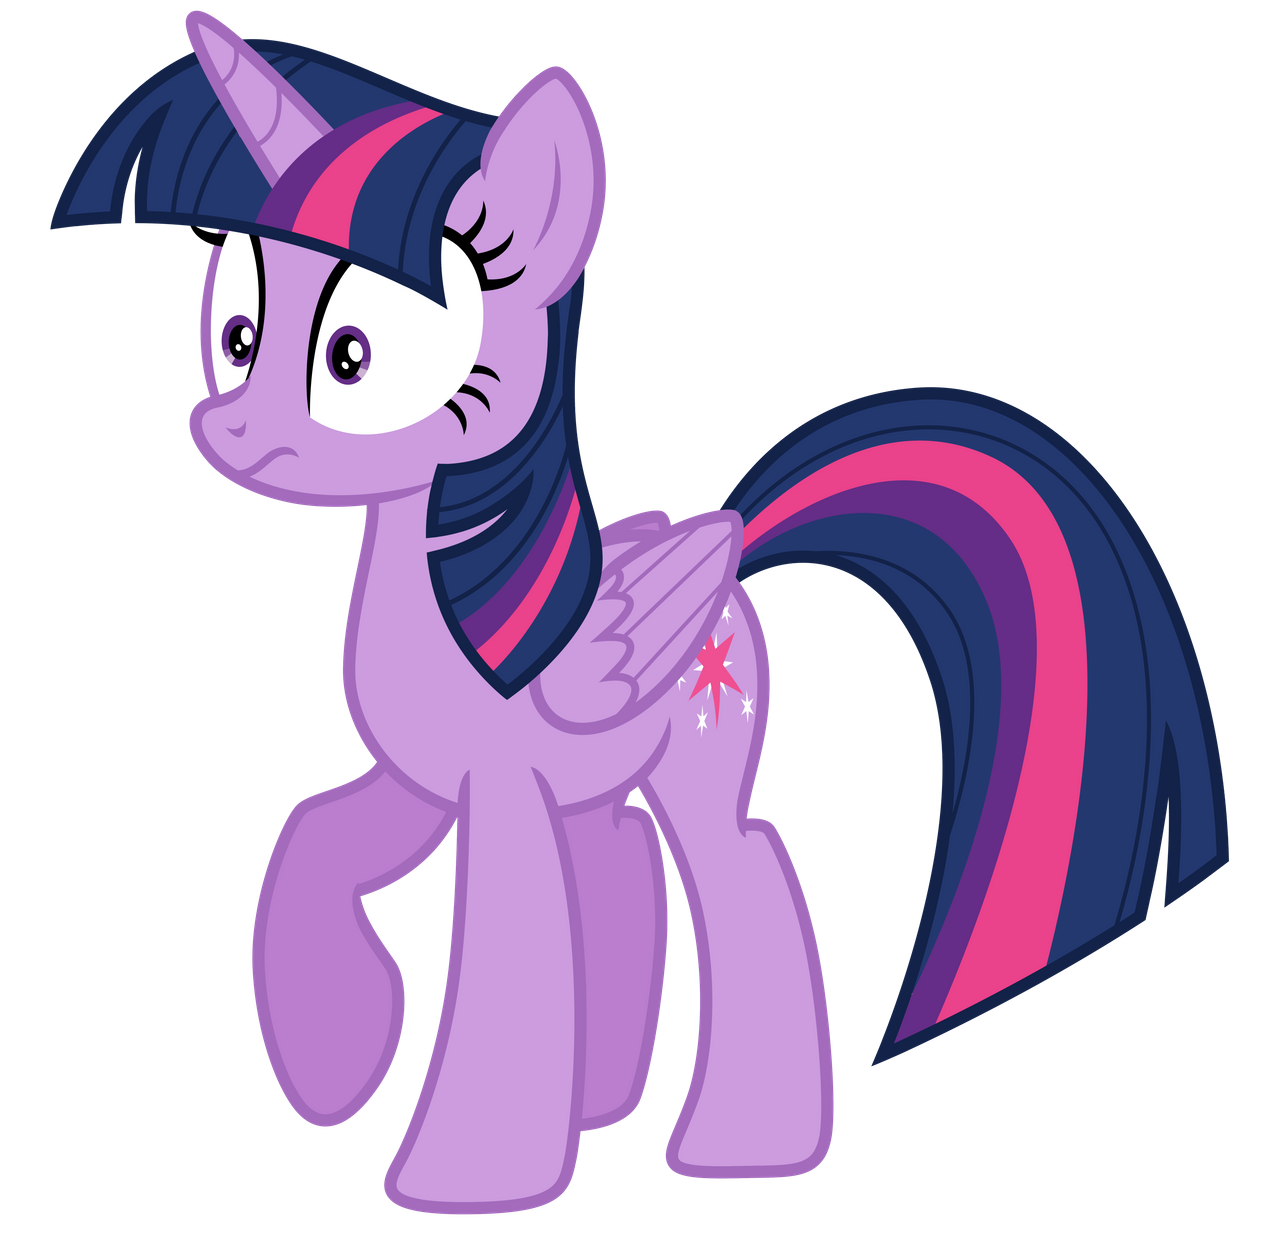 2388169__safe_artist-colon-estories_twilight+sparkle_alicorn_pony_episode+needed_female_folded+wings_frown_mare_raised+hoof_simple+background_solo_transparent+b.png